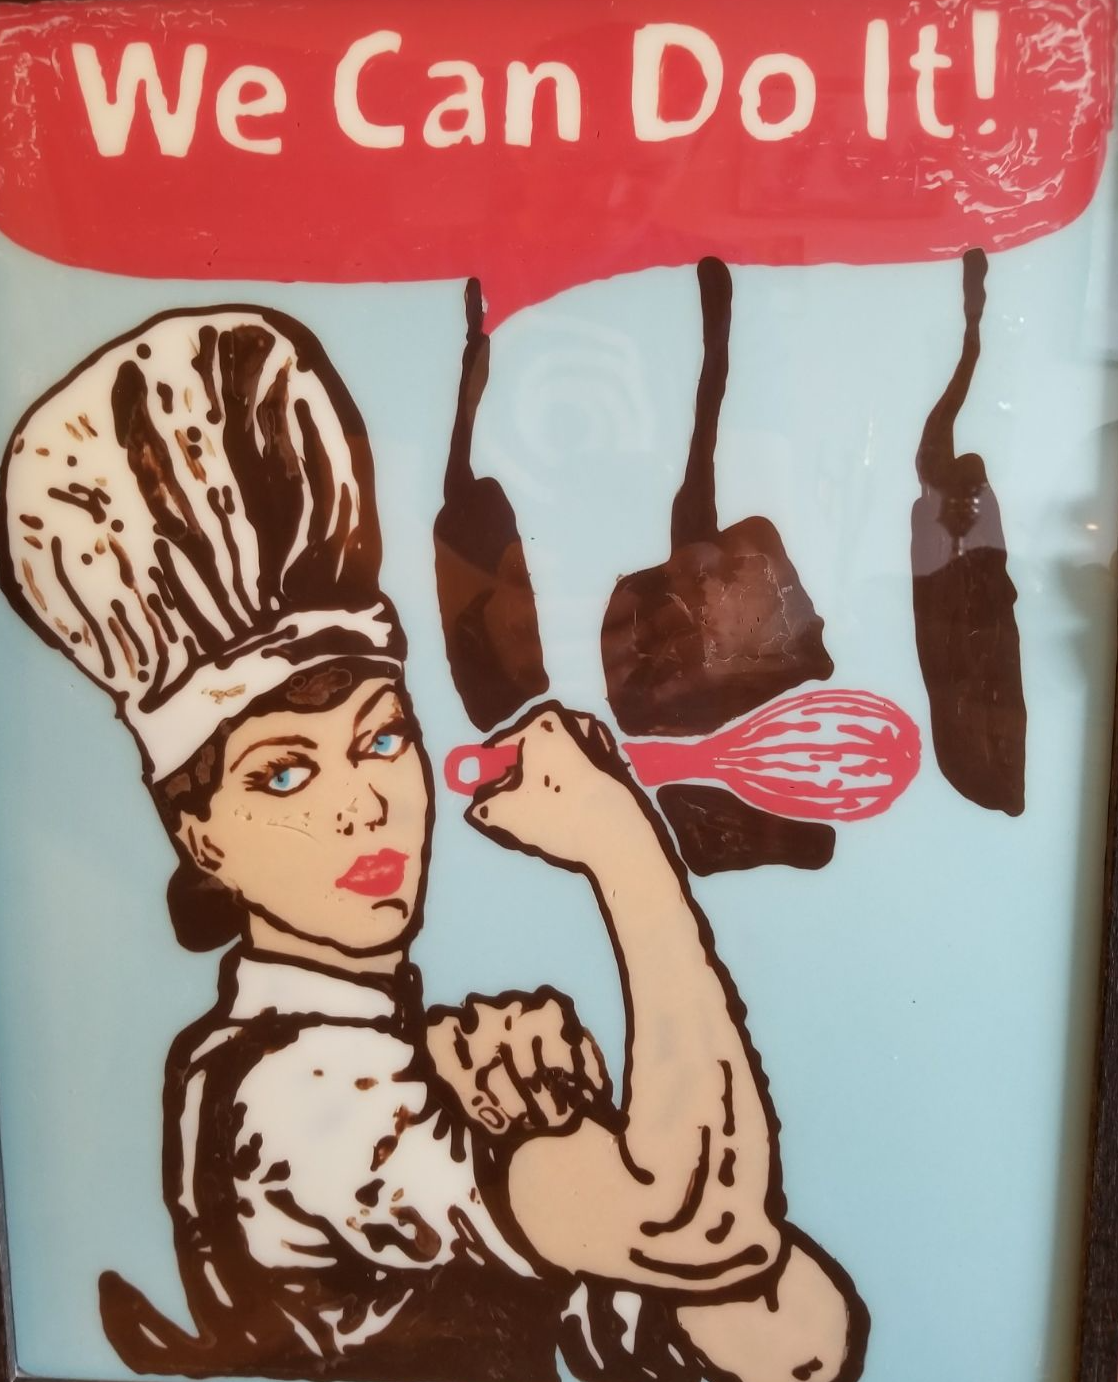 An edible - made entirely of chocolate - homage to Rosie the Riveter with Rosie in a chef's uniform.